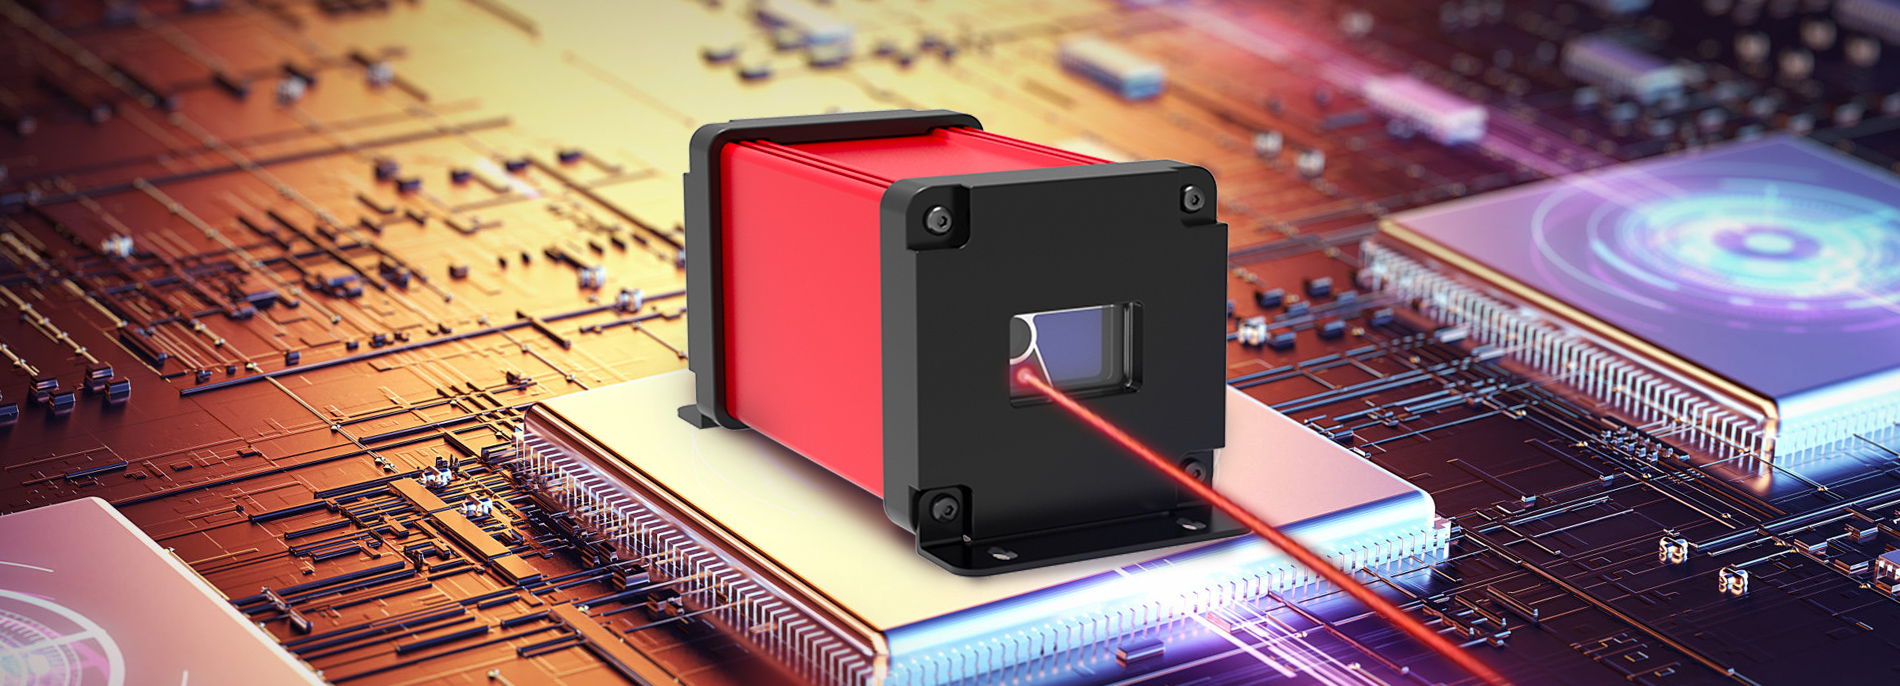 SK - Pro laser ranging sensors, high precision, high frequency range of professional equipment